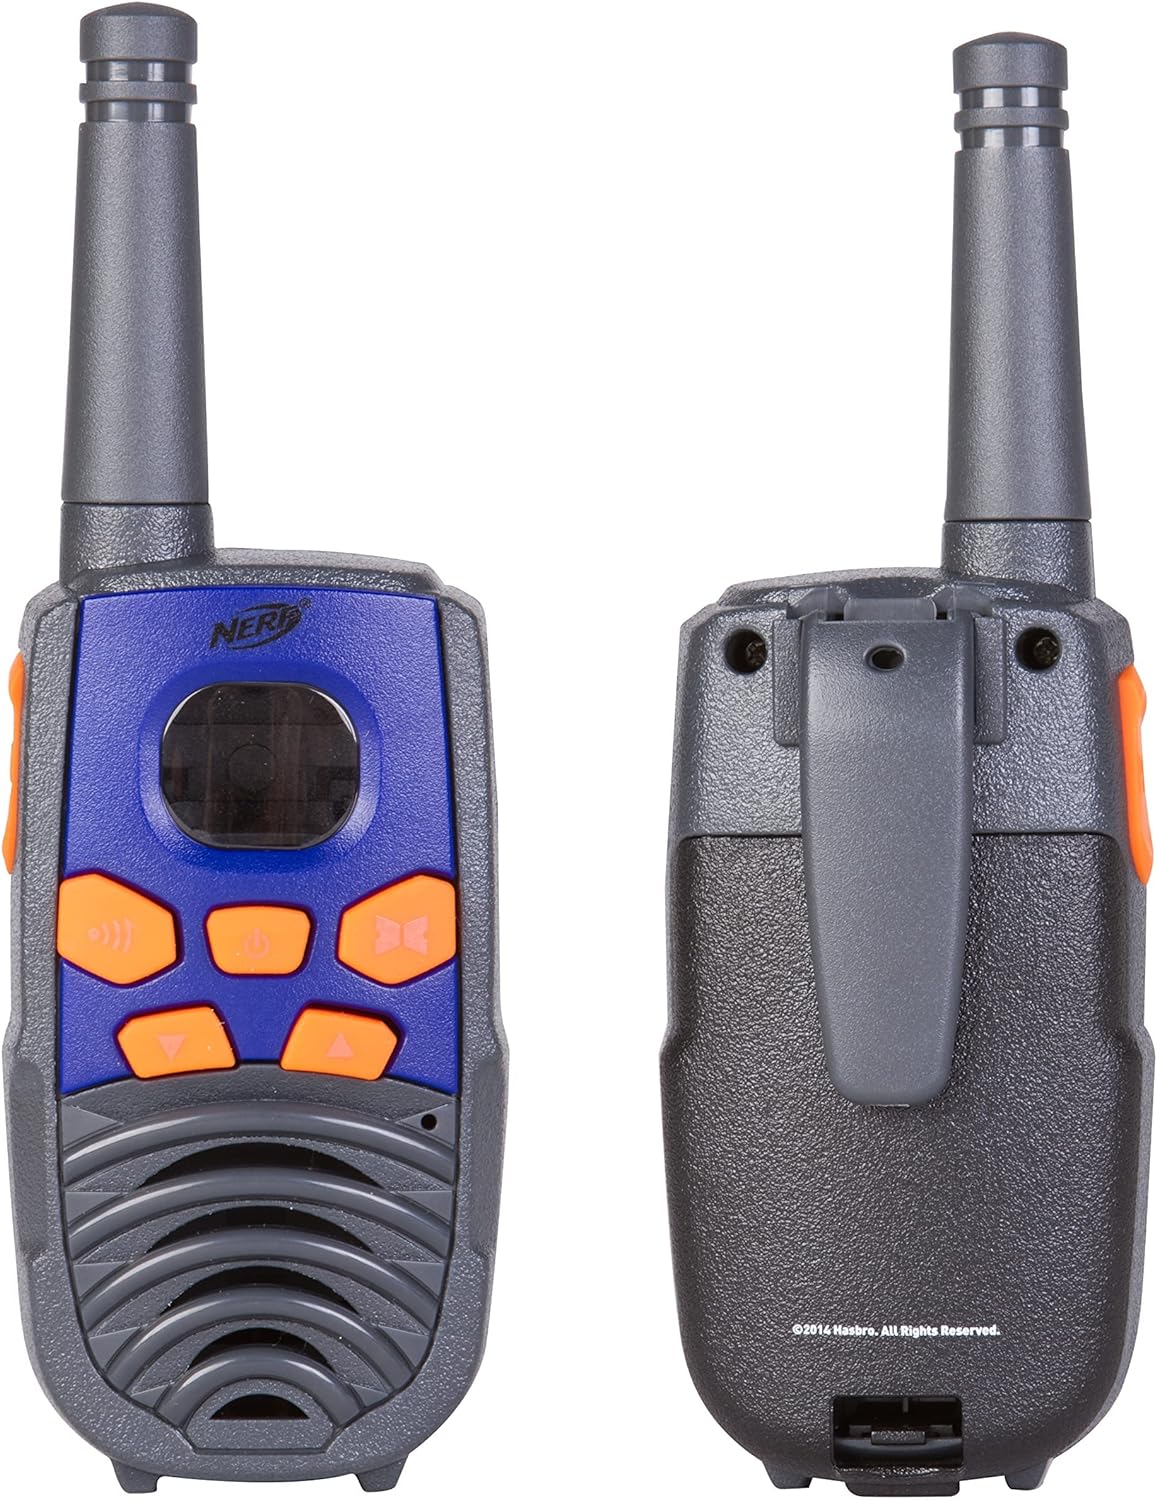 NERF 10 Mile Walkie Talkies Set 37756 | Delivers Transmission with 10 Mile Communication Range, Flexible Safety Antenna & Morse Code with On/Off Switch (Orange & Black)